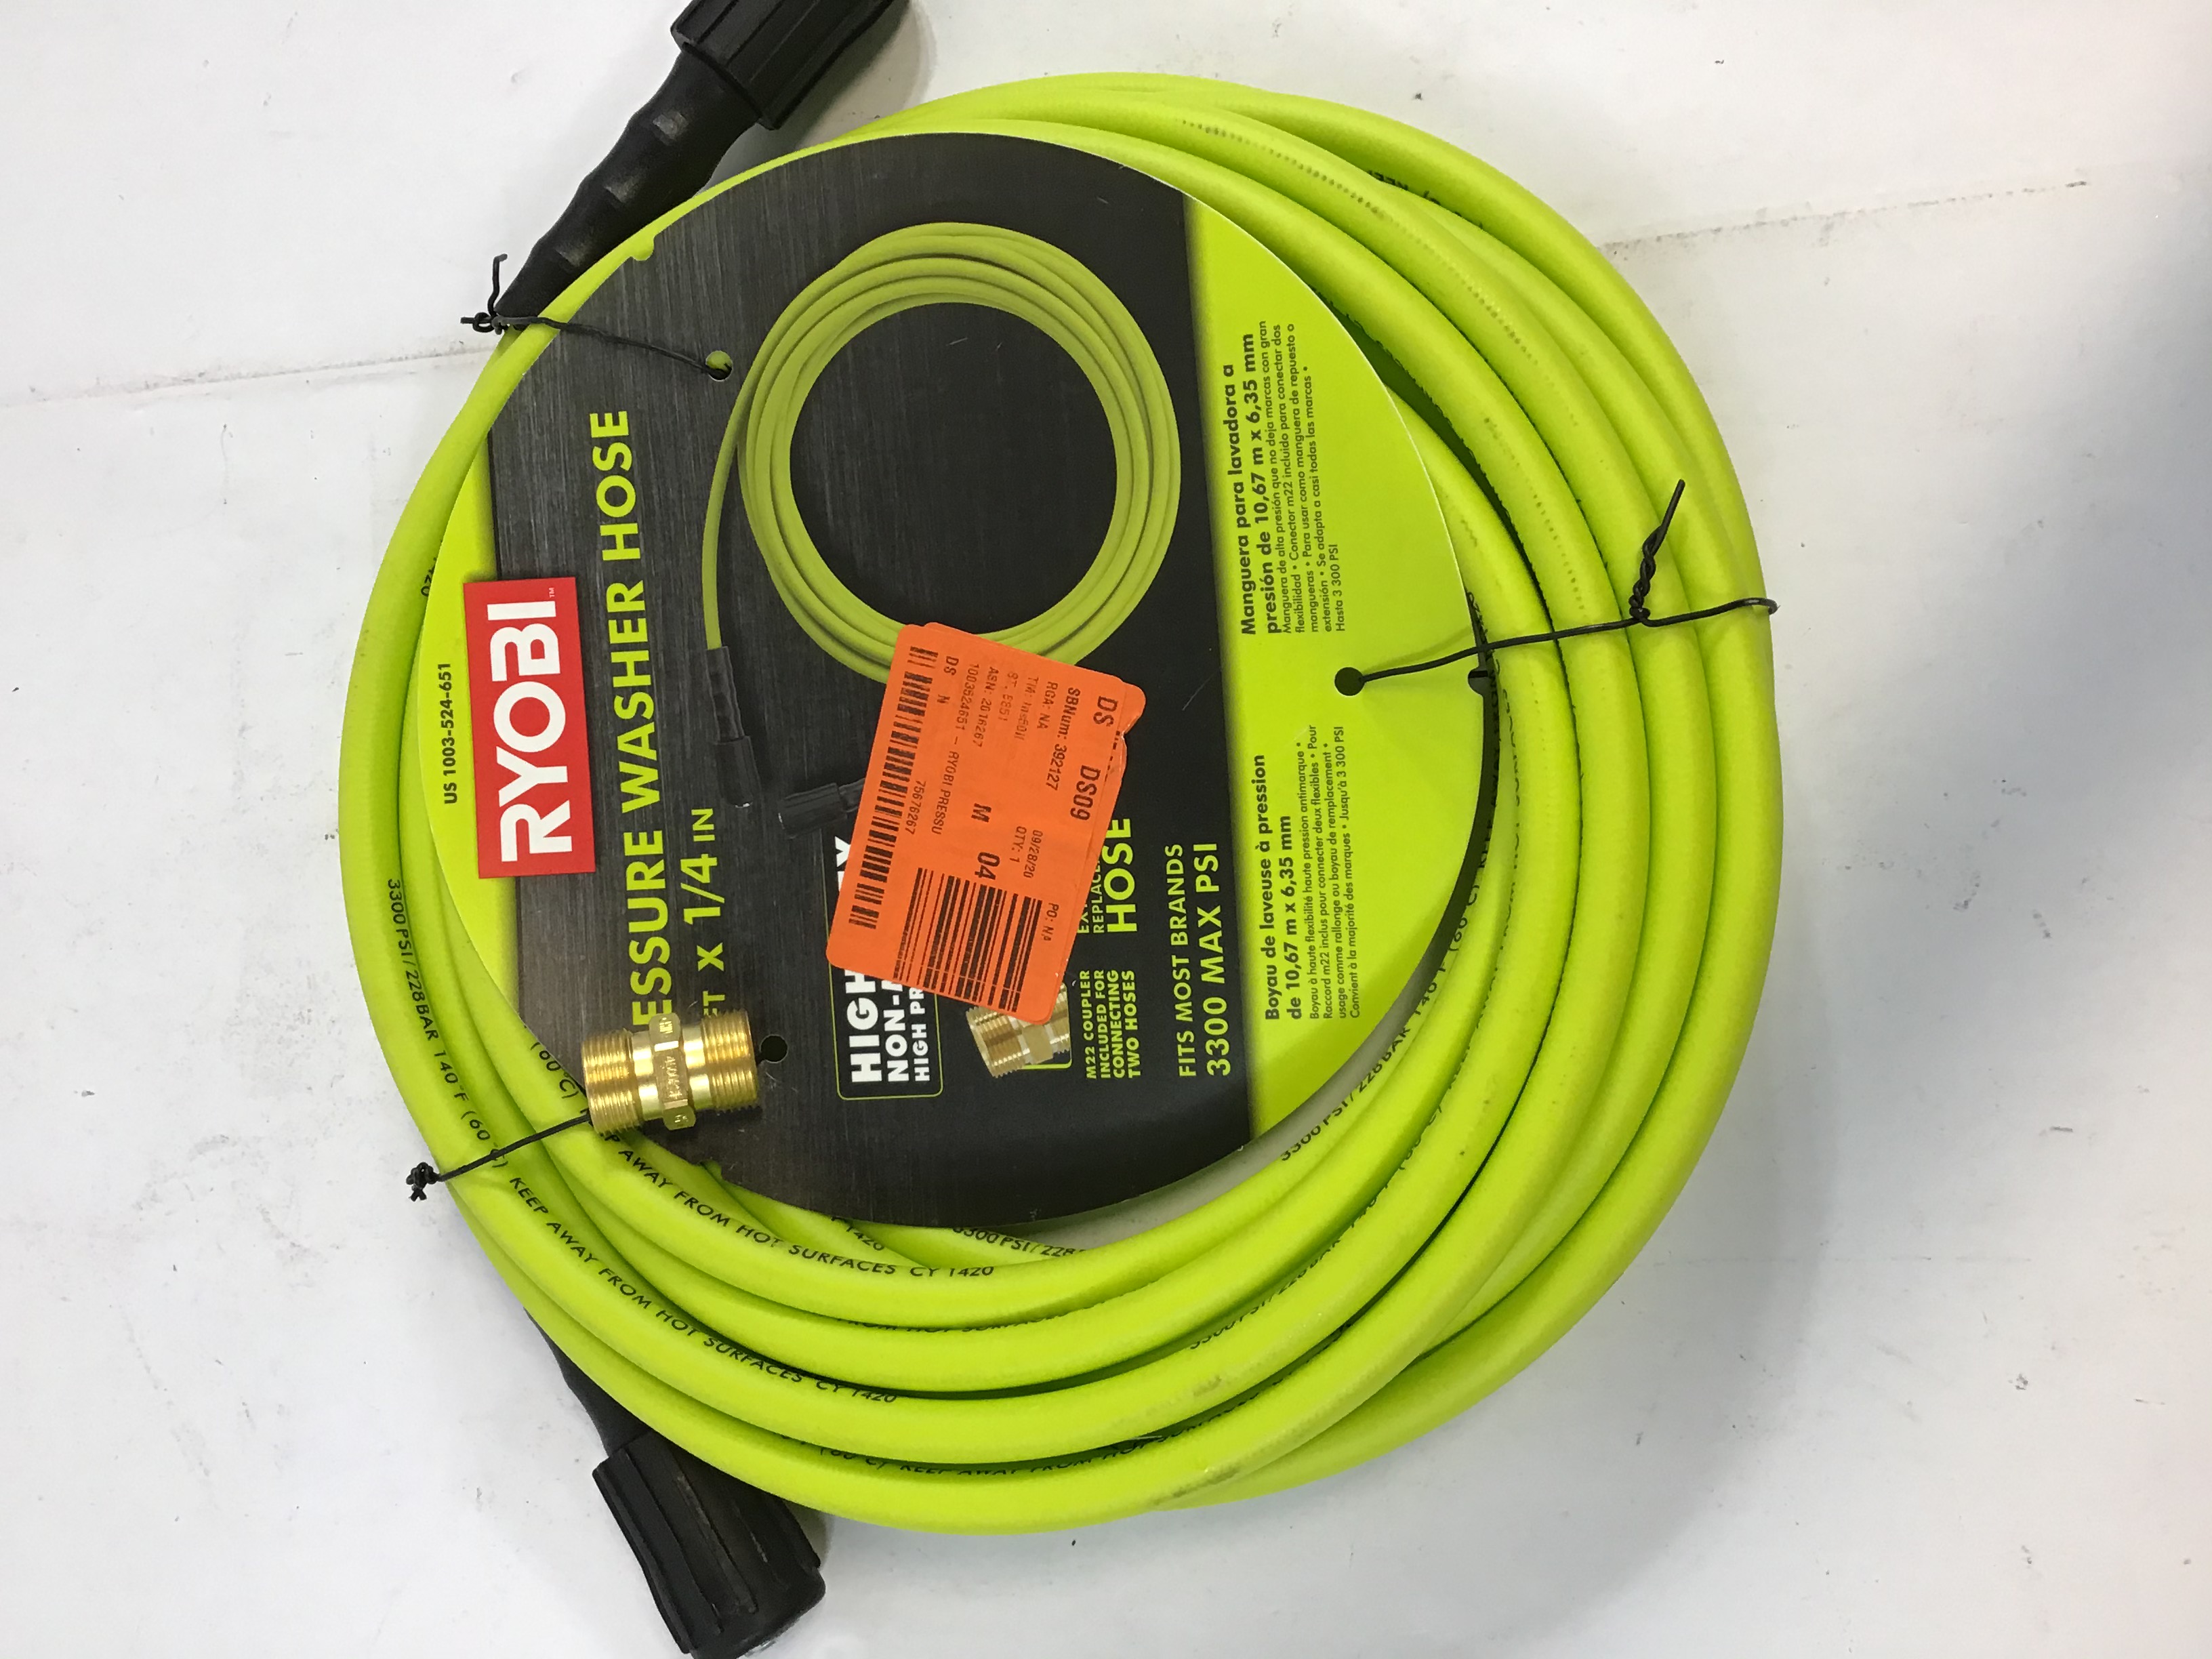 replacement hose for ryobi 2900 psi pressure washer